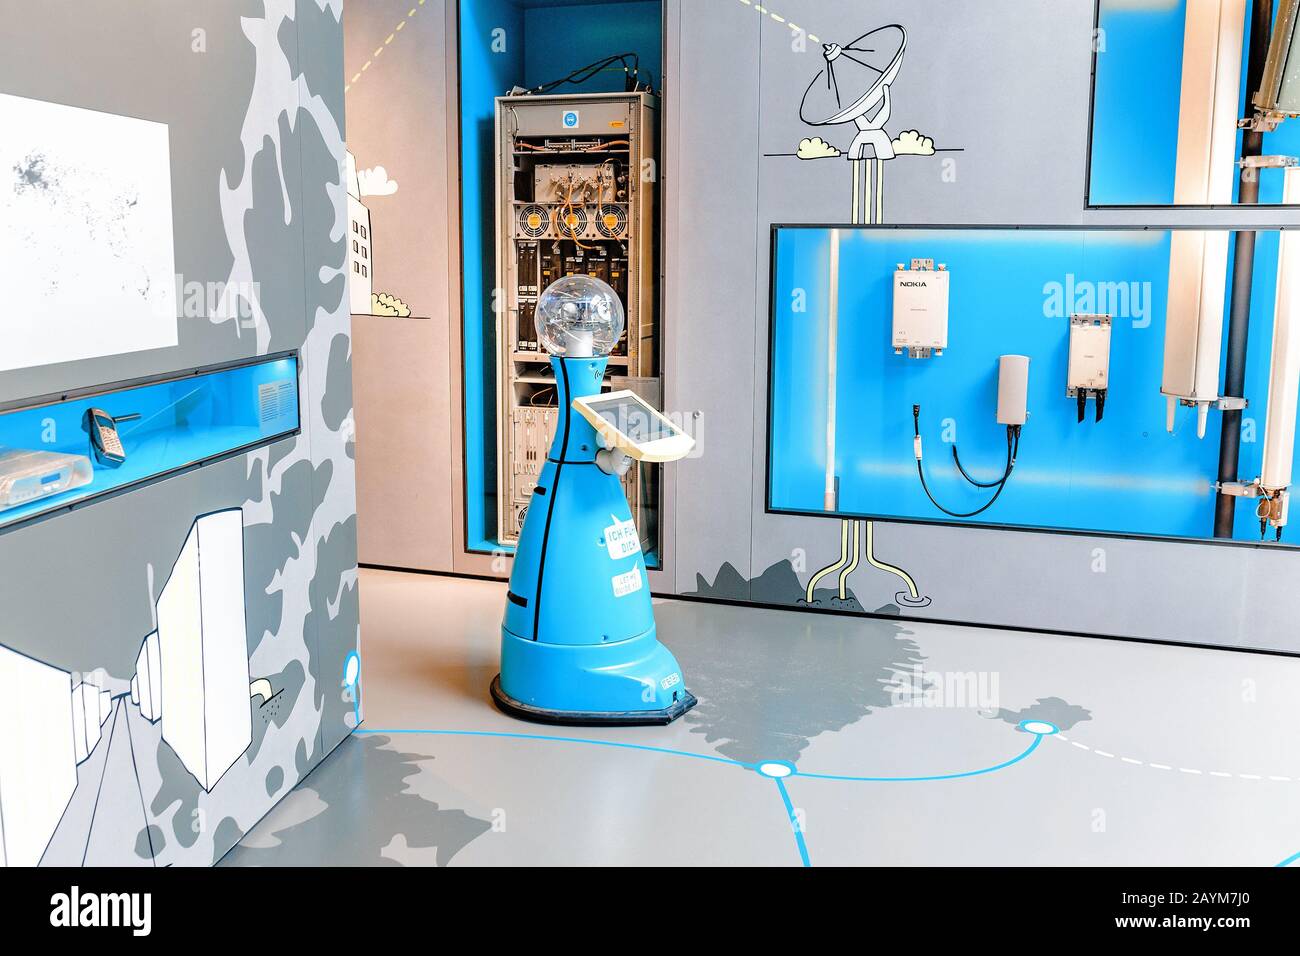 BERLIN, GERMANY - 19 MAY 2018: Robot assistant guide in Exhibition of  Internet connection and Communications at the German Technical Museum in  Berlin Stock Photo - Alamy